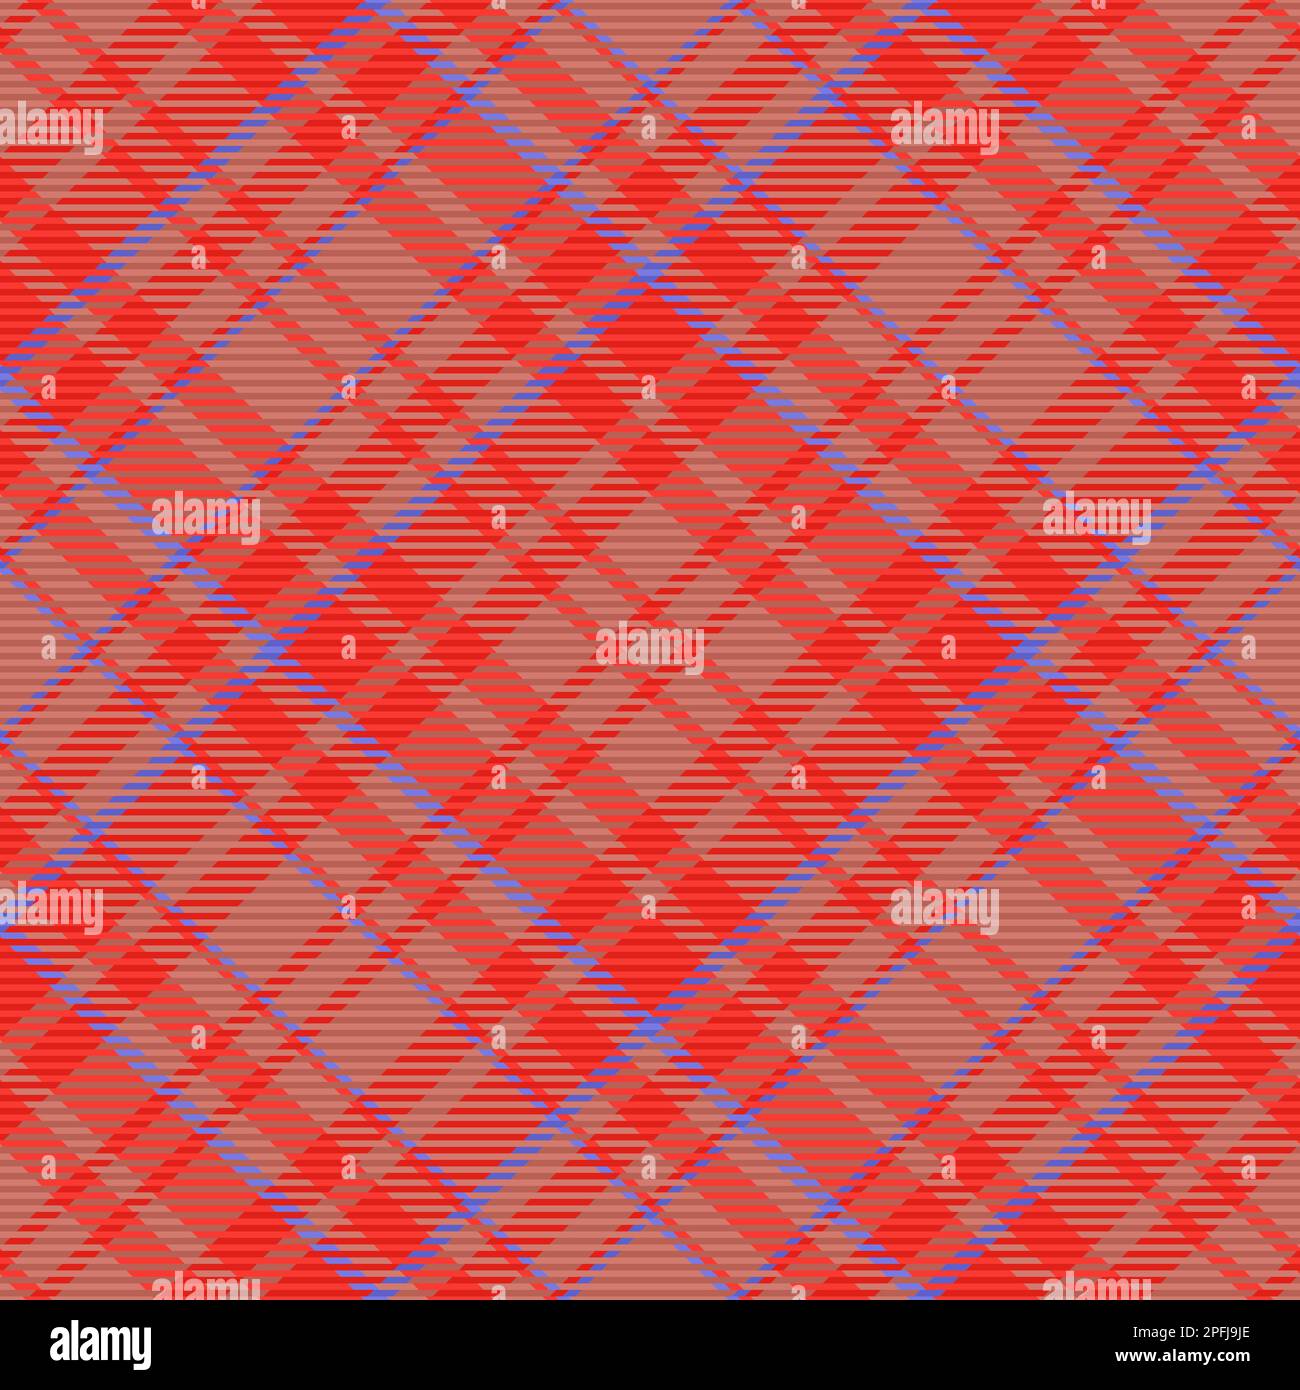 Tartan background check. Vector fabric texture. Seamless pattern textile plaid in red and blue colors. Stock Vector